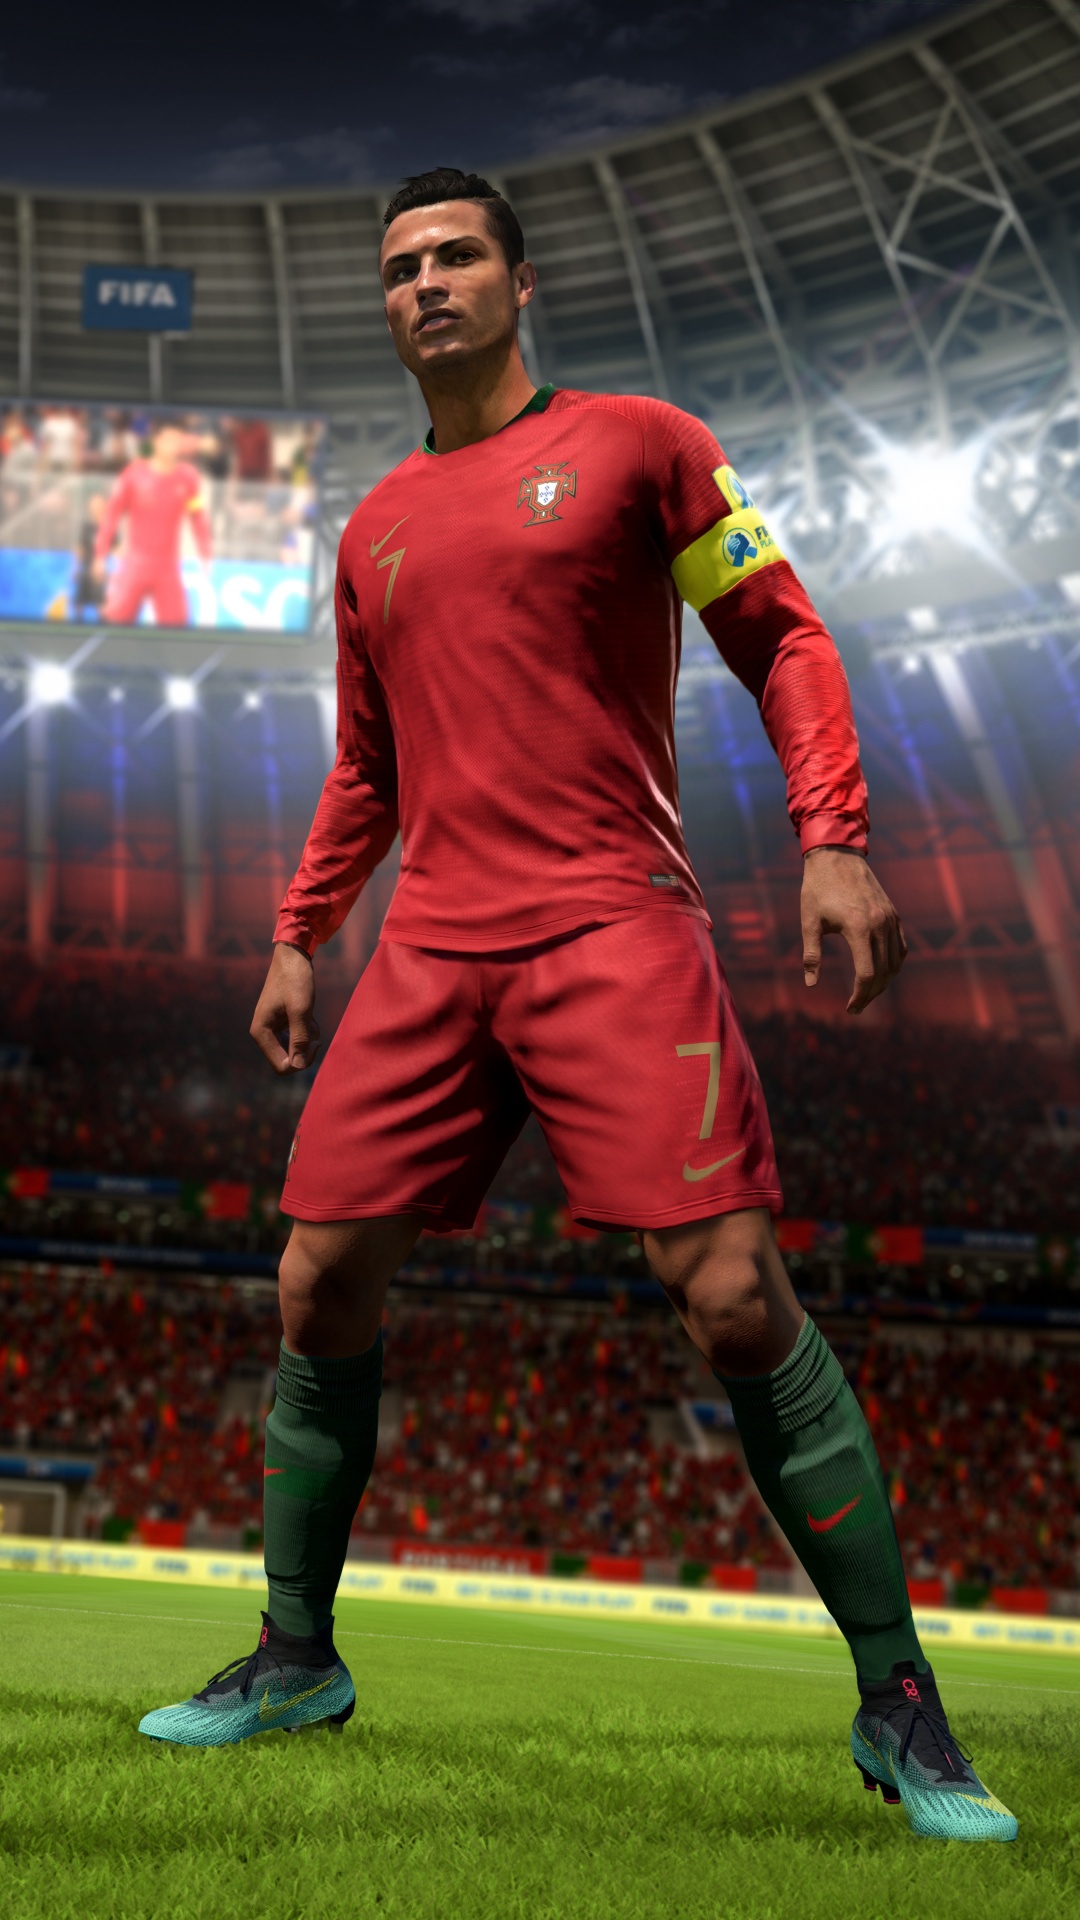 FIFA 18, 2018 World Cup, ea Sports, Electronic Arts, Playstation 4. Wallpaper in 1080x1920 Resolution